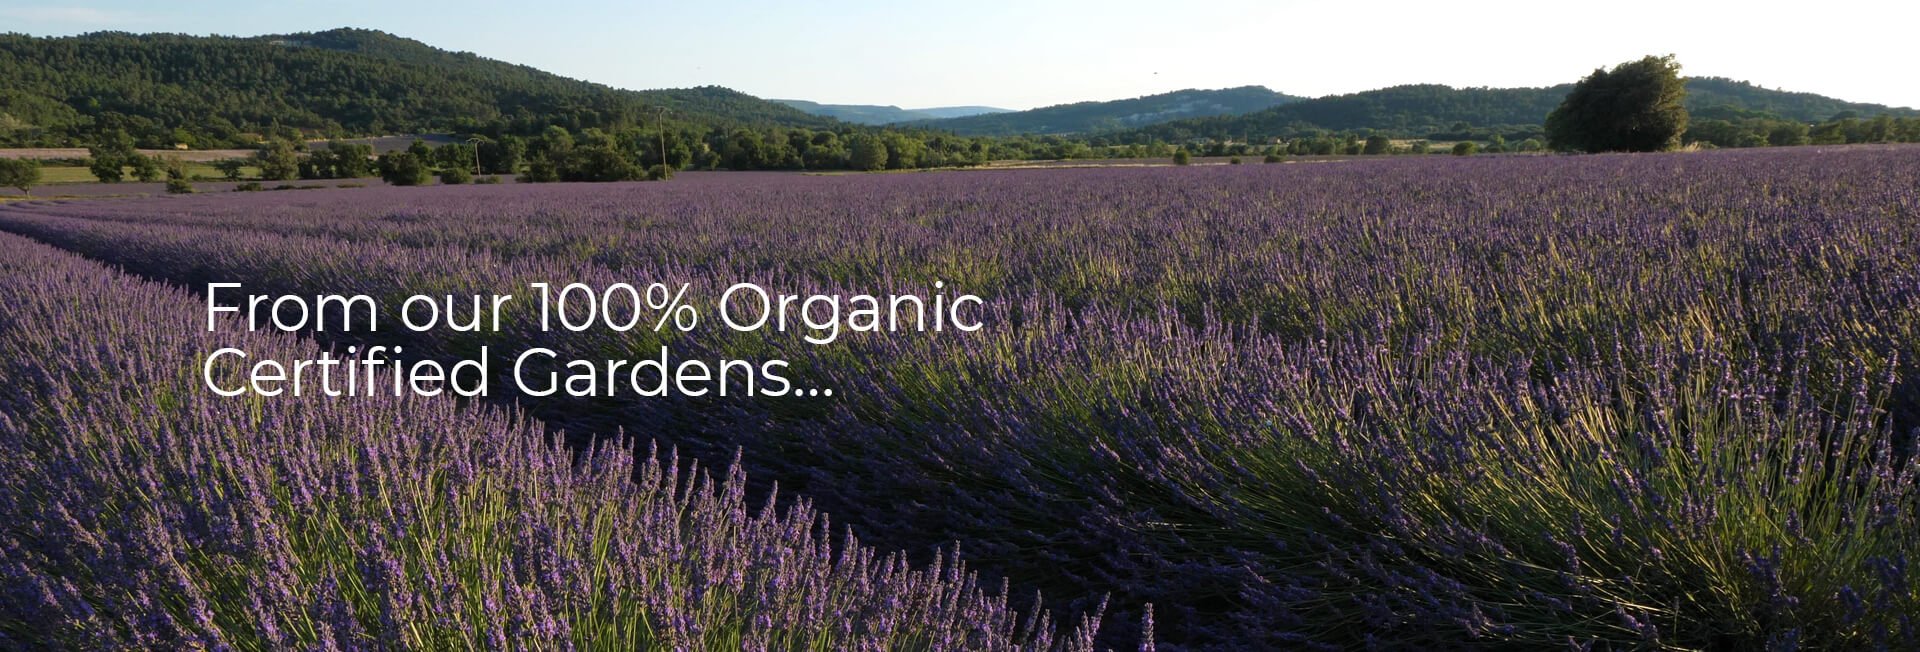 From Our 100% Organic Certified Gardens